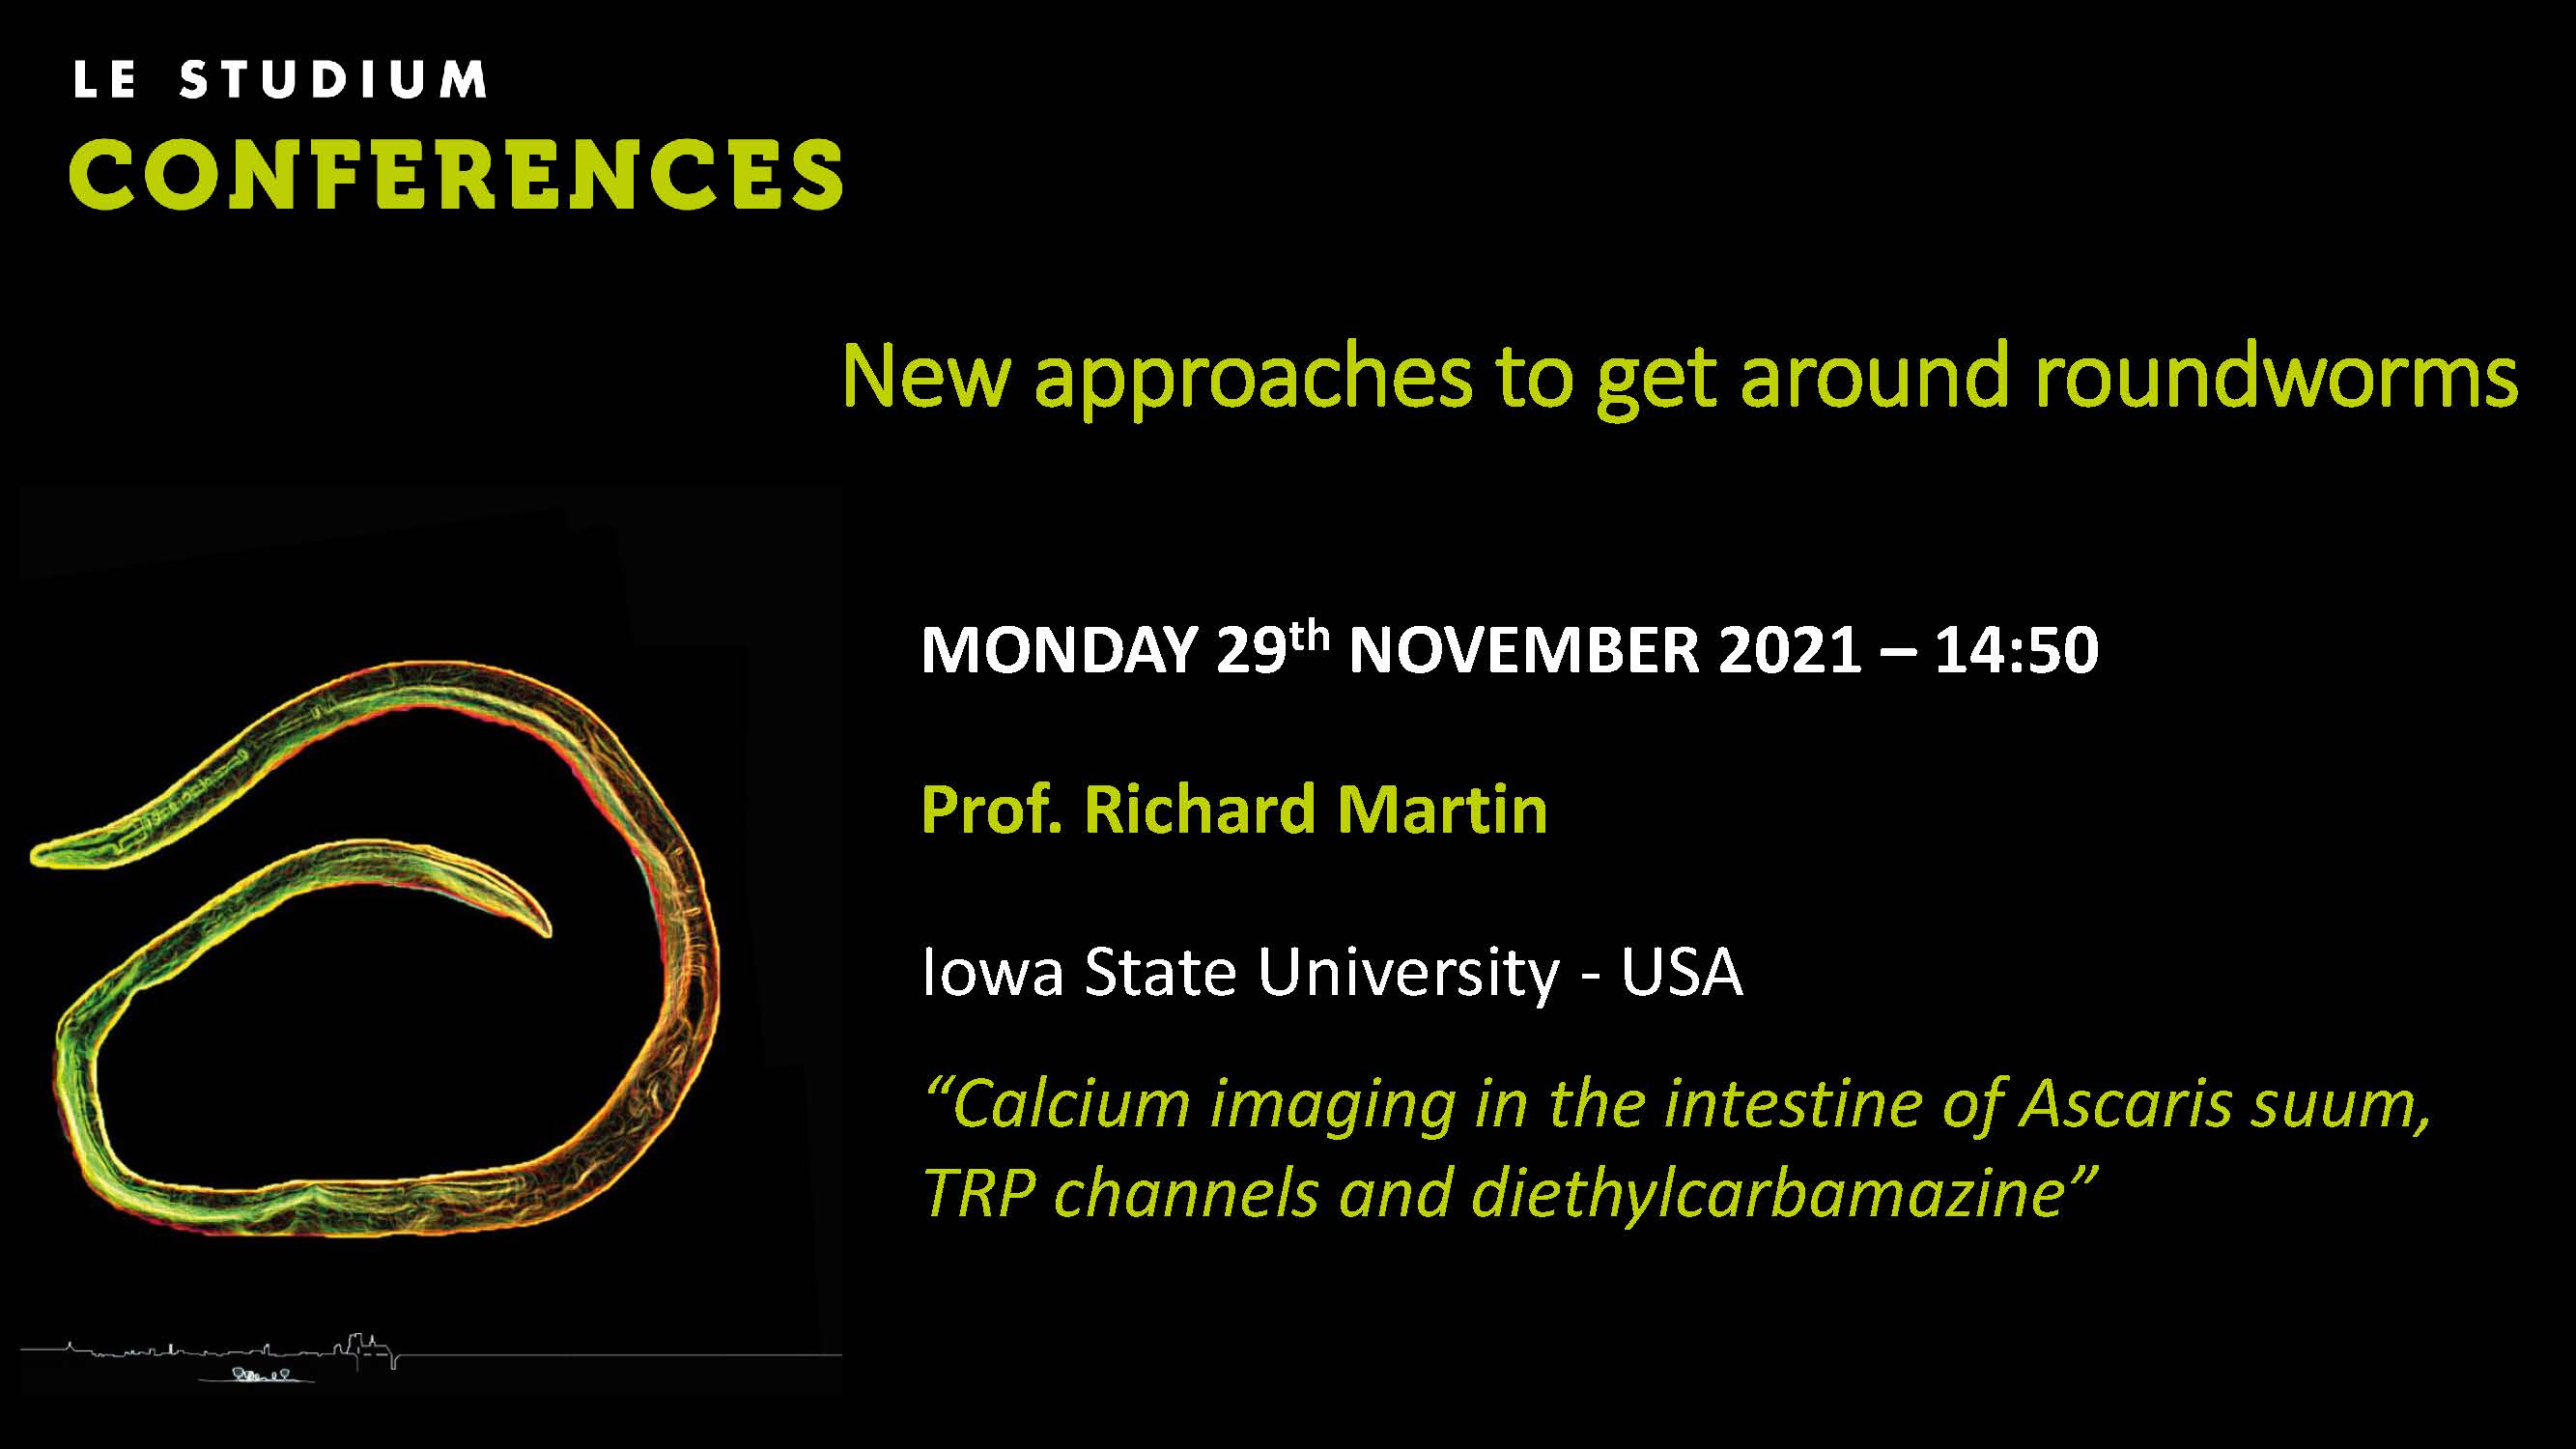 Prof. Richard Martin - Calcium imaging in the intestine of Ascaris suum, TRP channels and diethylcarbamazine